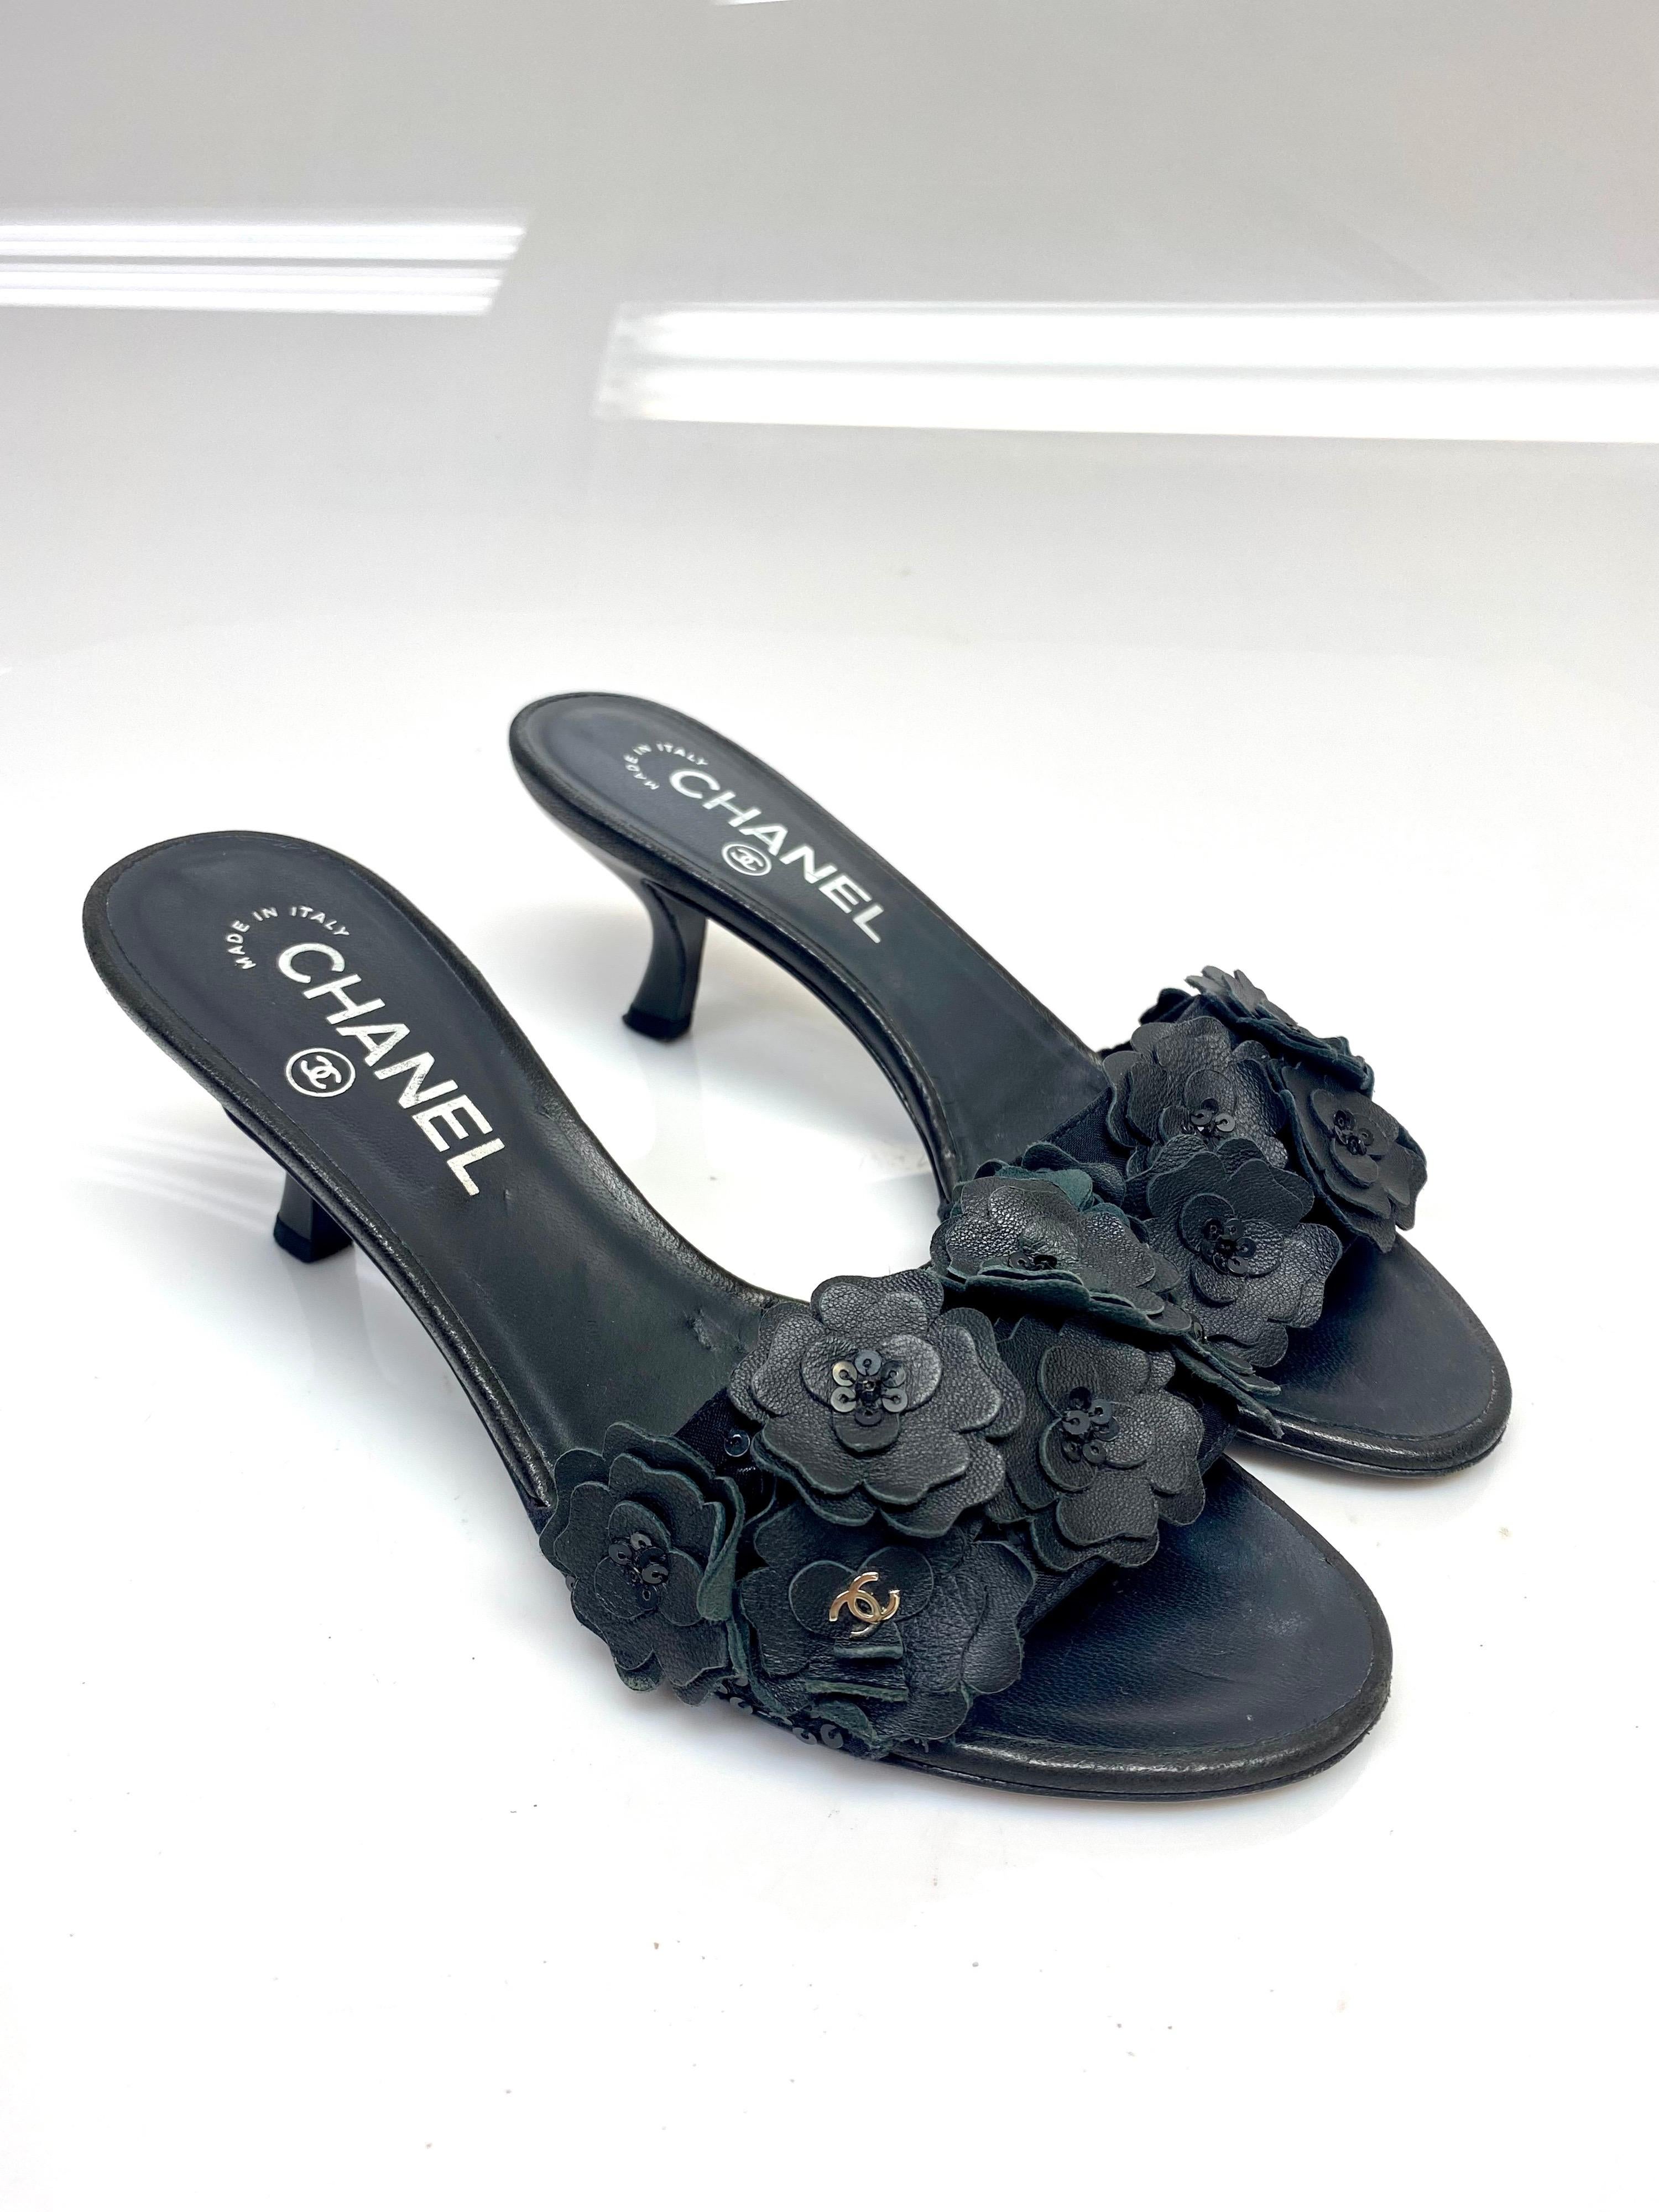 Chanel Black Multi Camelia Slides with sequin.  Size 35.5. These heeled slides from Chanel will bring you effortless style. They have been crafted from leather and designed with the brands signature Camellia's perched around the front of the shoe.